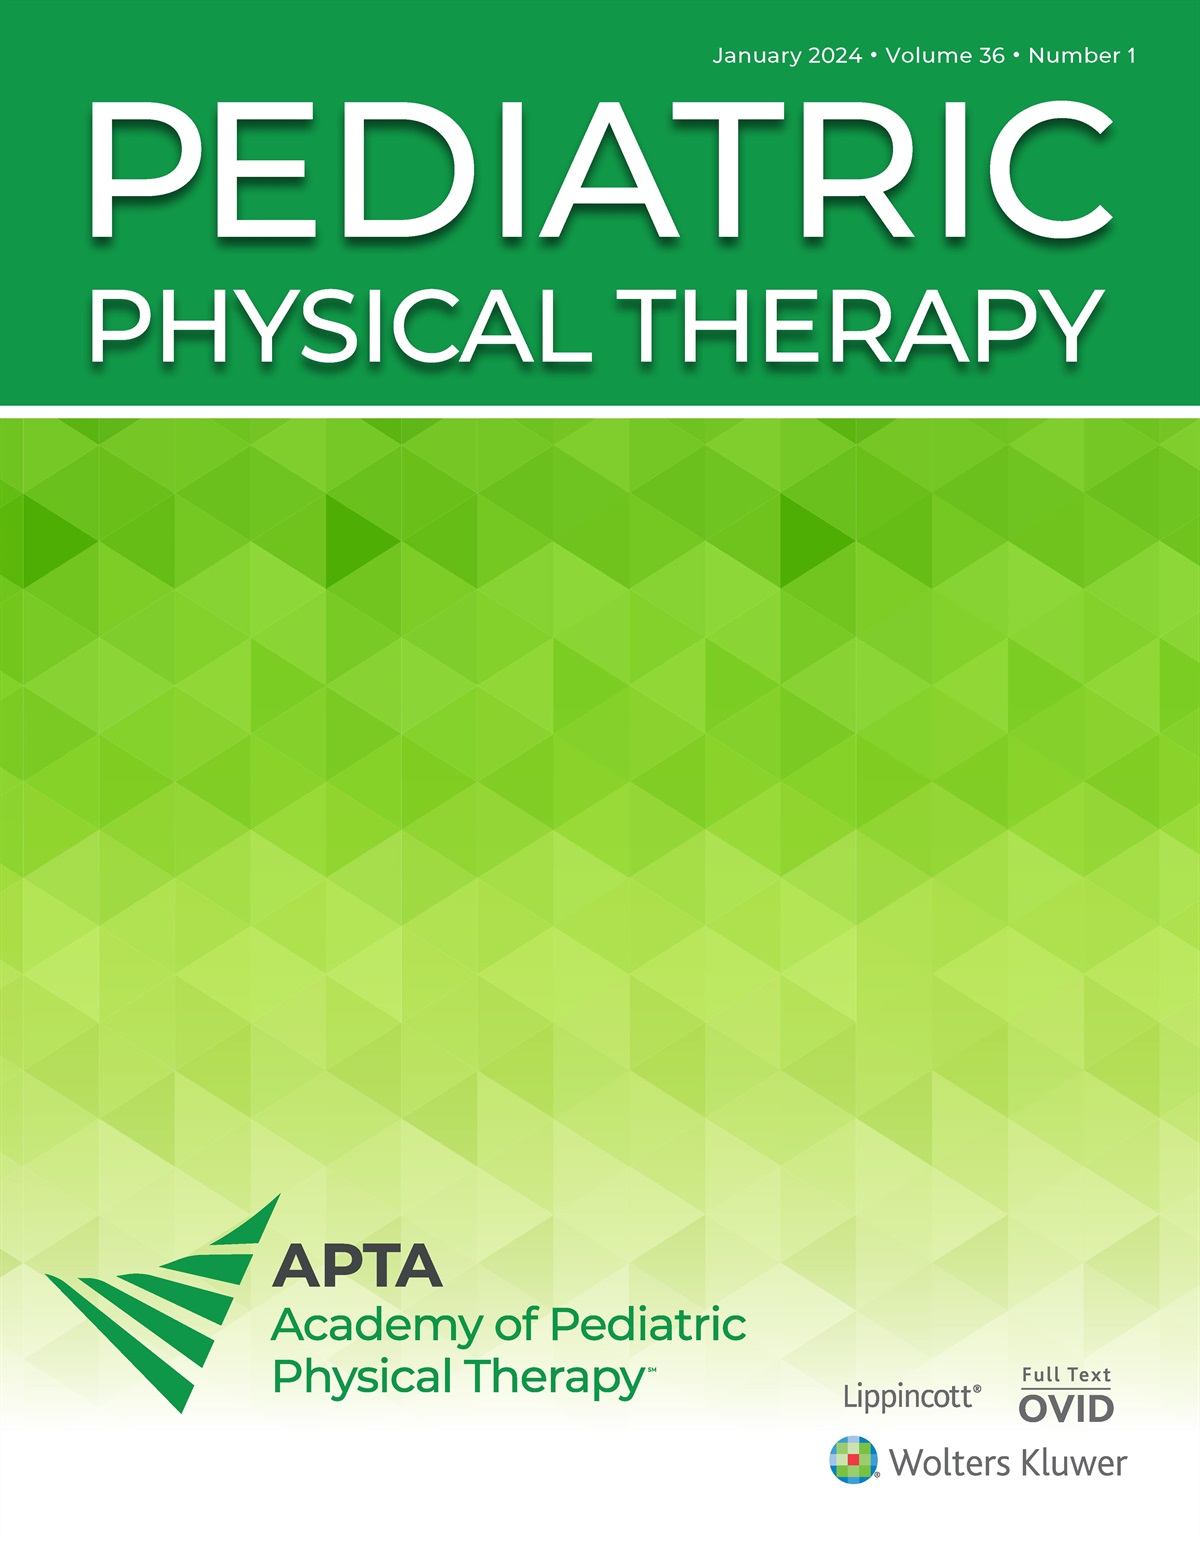 Abstracts of the APTA Academy of Pediatric Physical Therapy Poster Presentations at the Combined Sections Meeting